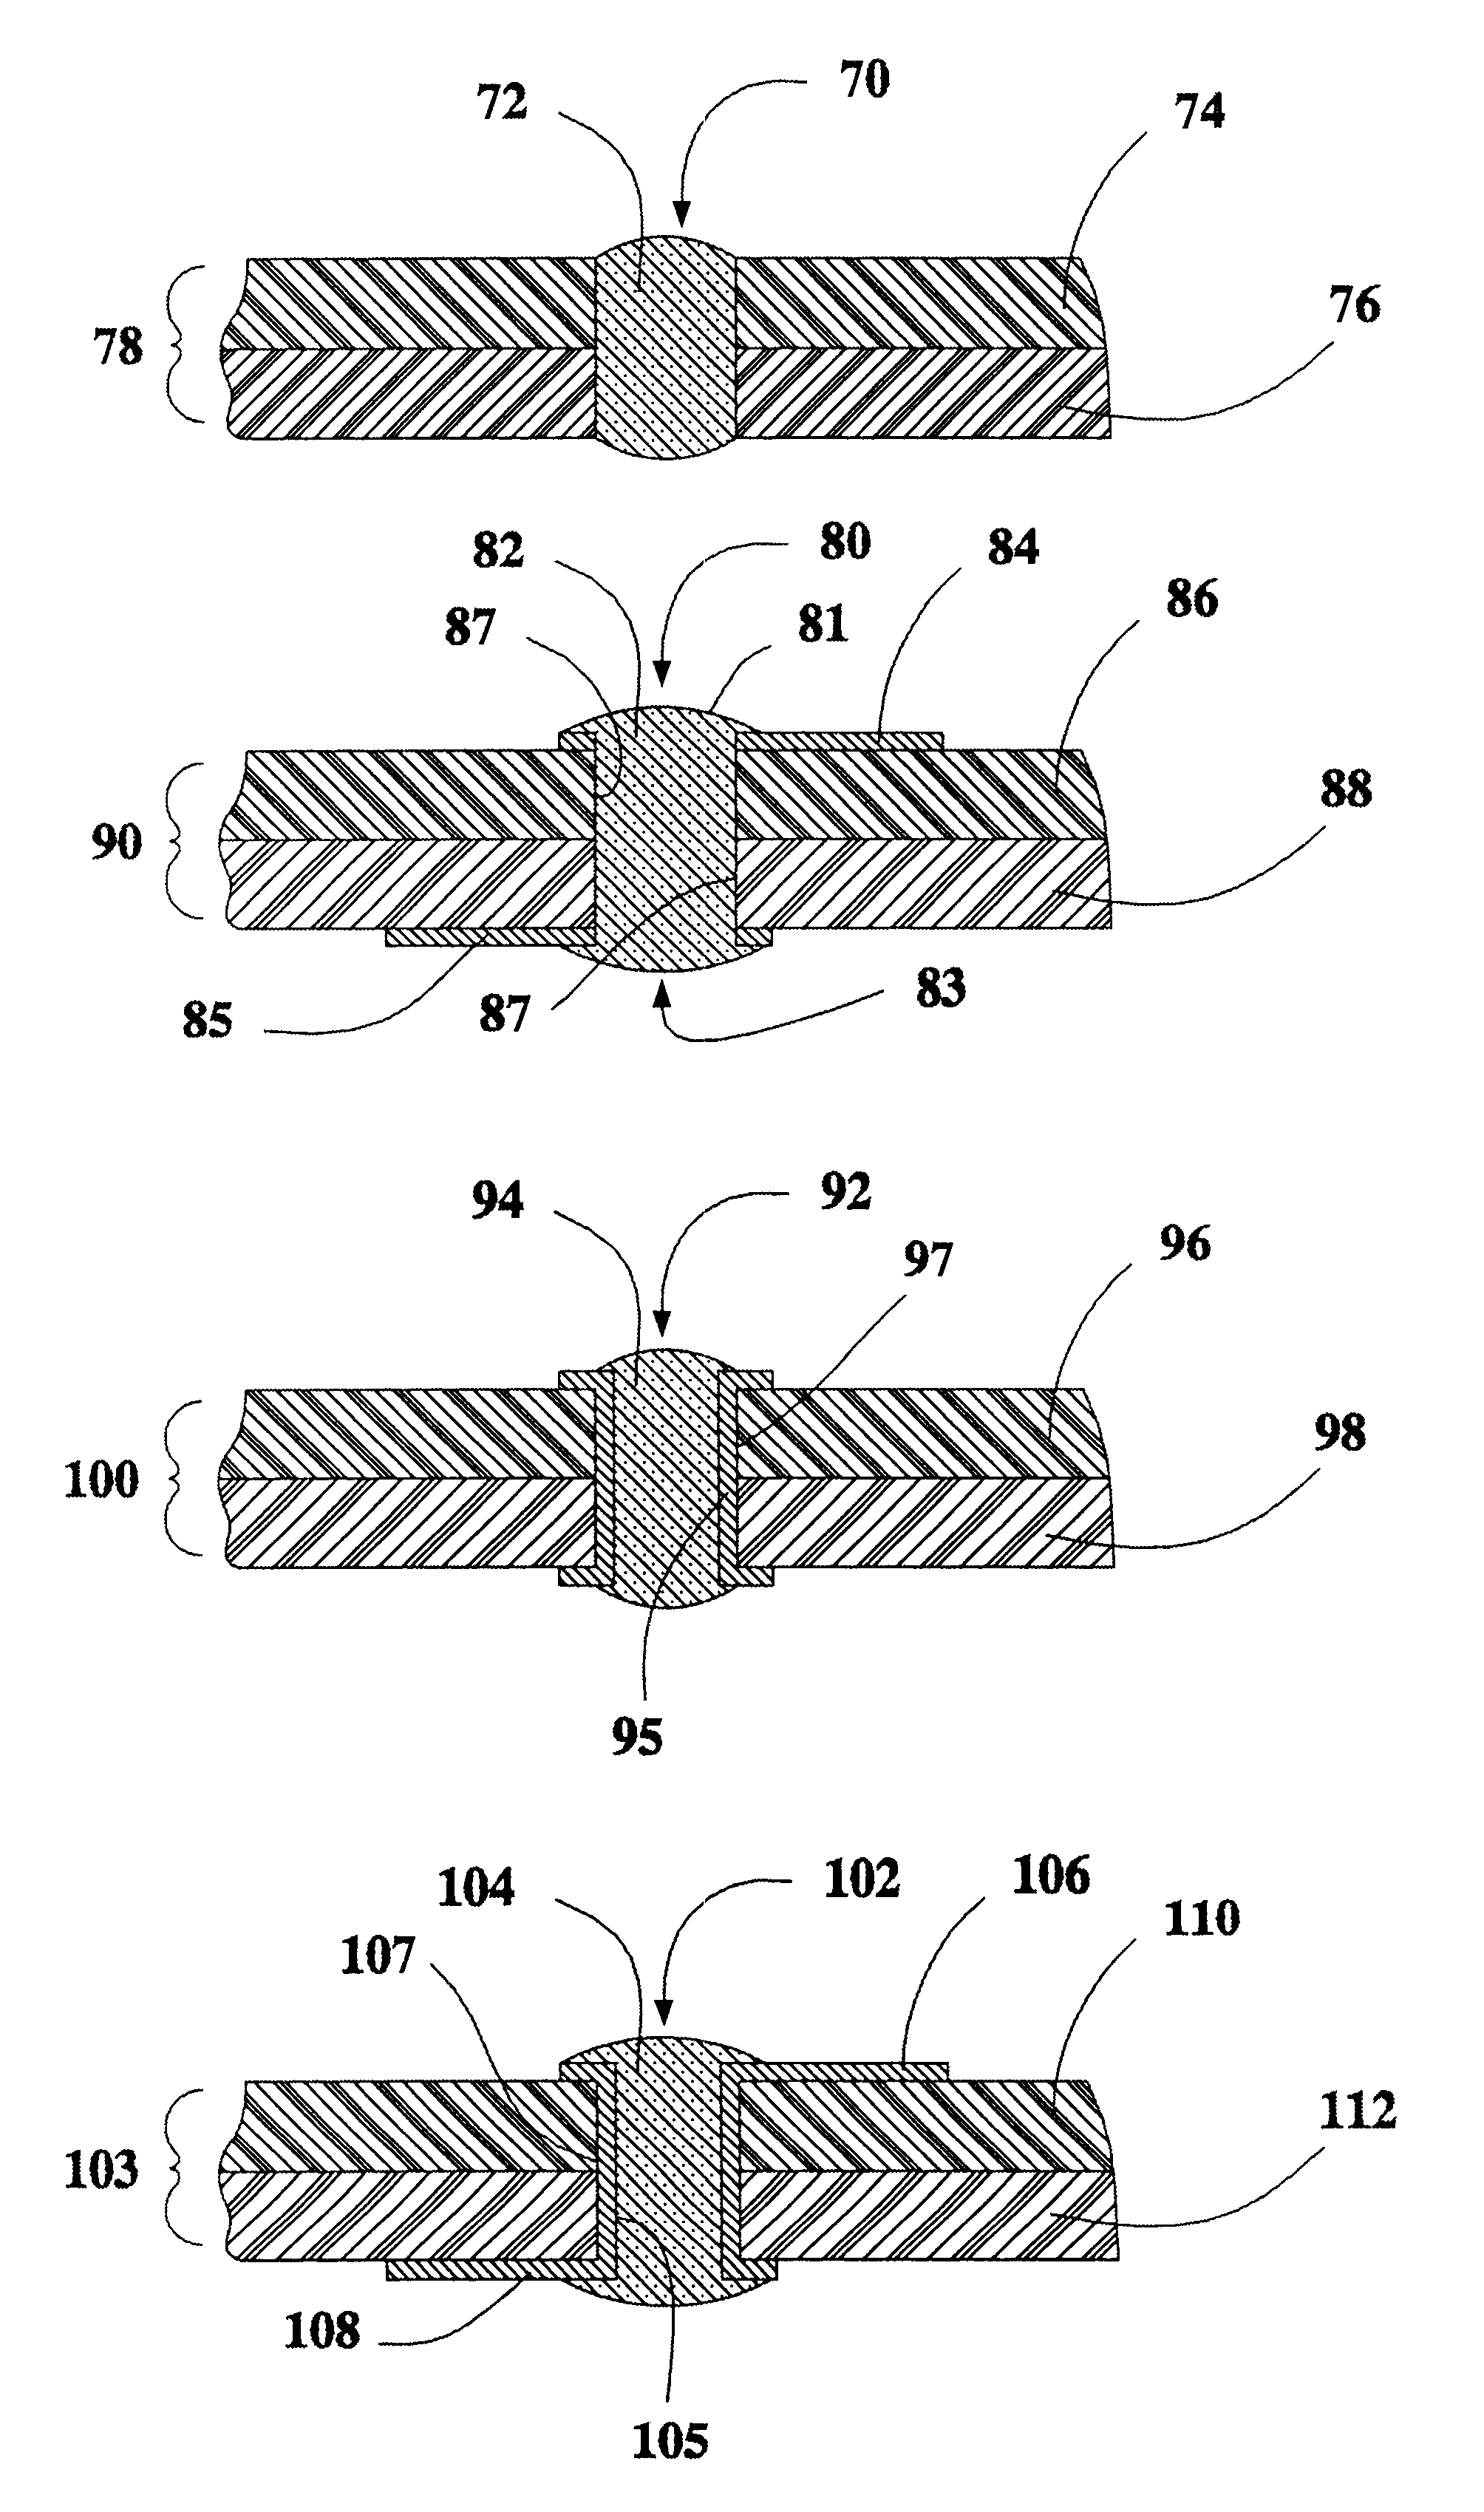 Printed wiring board conductive via hole filler having metal oxide reducing capability